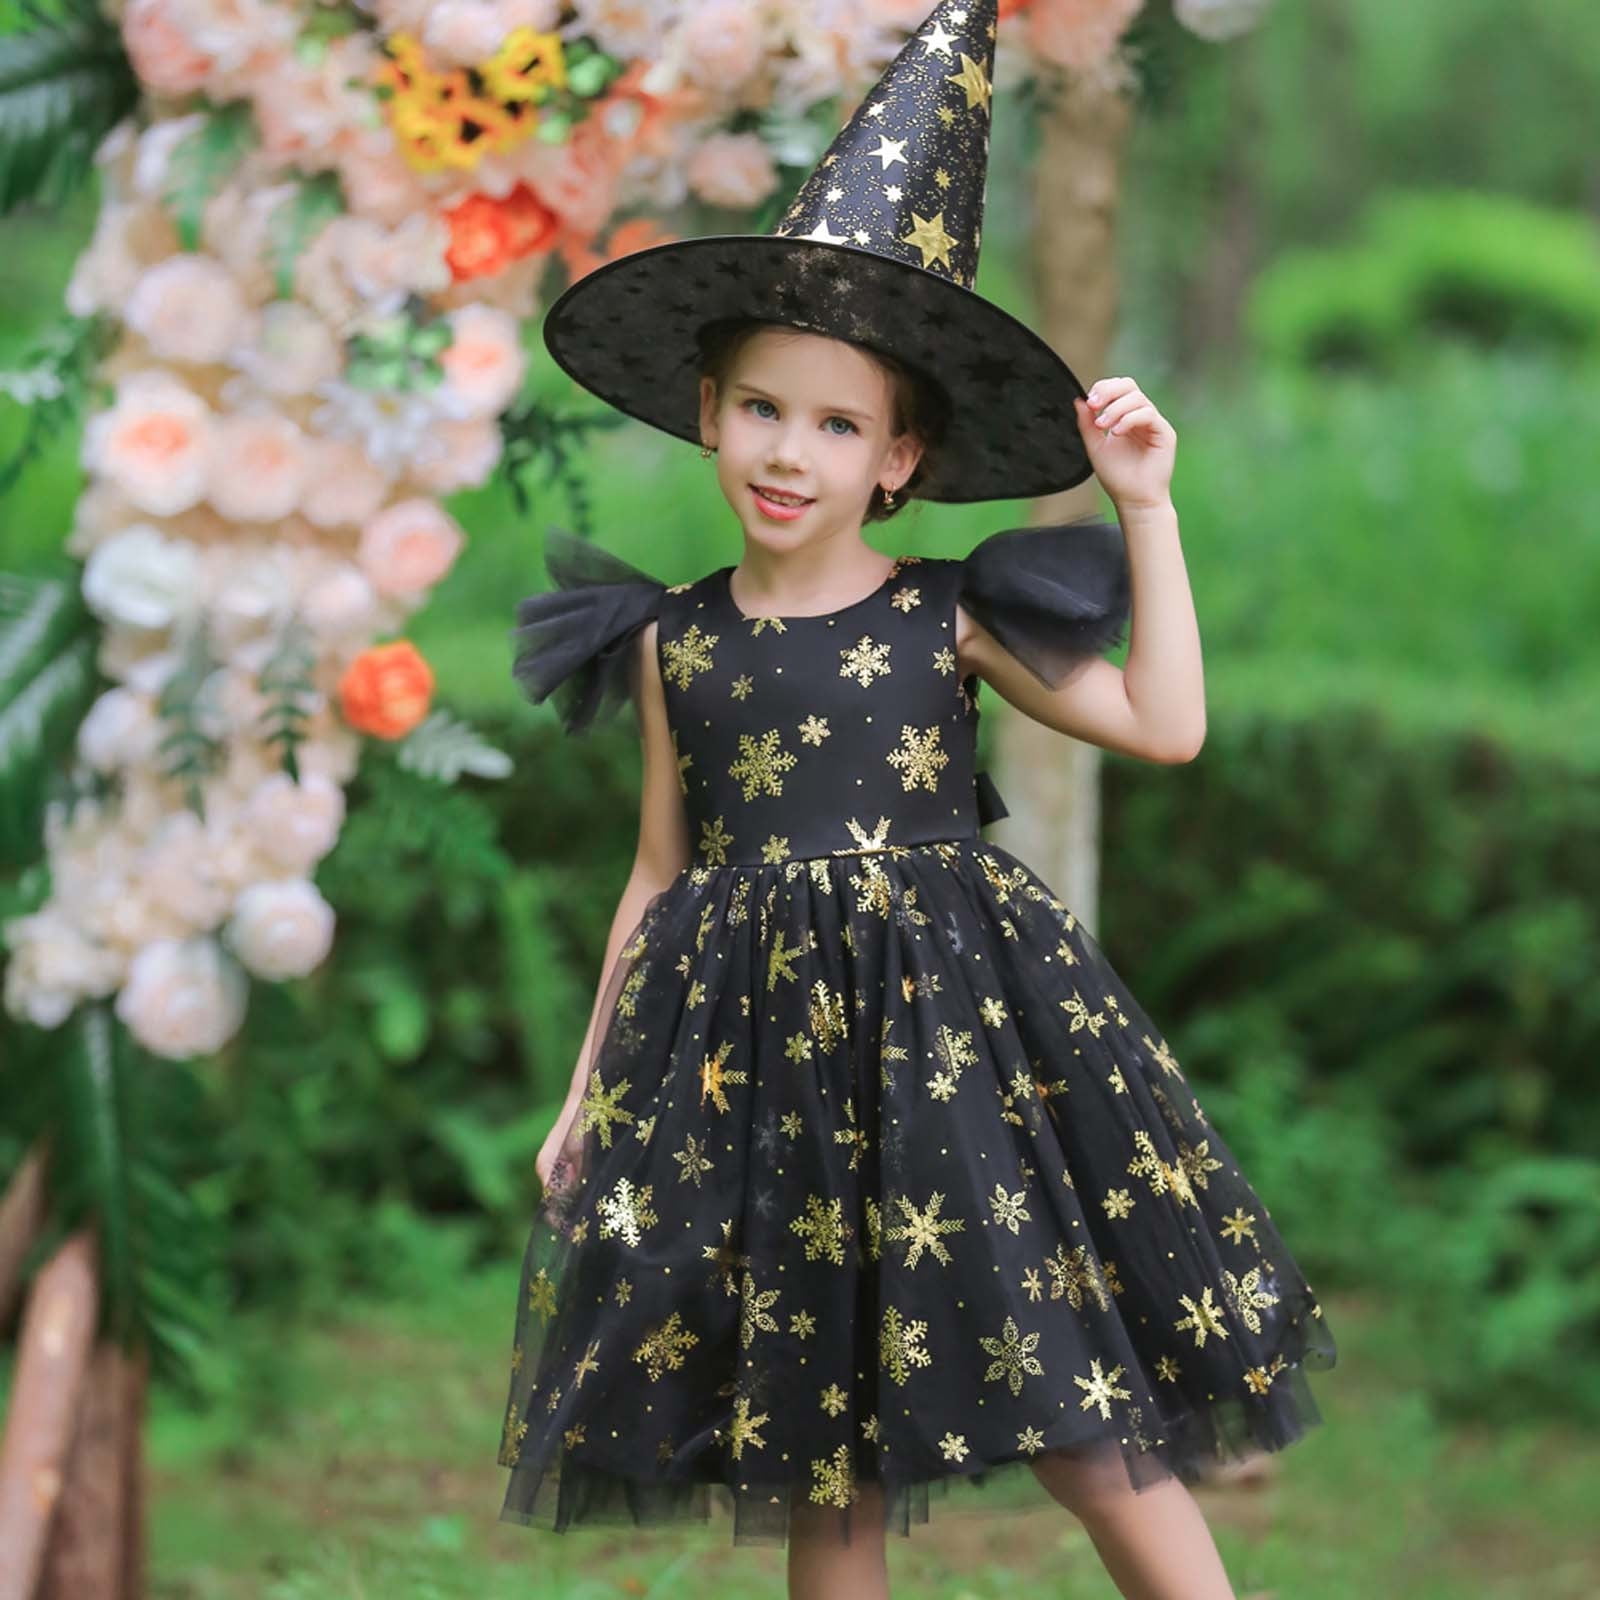 21 Easy Kids' Halloween Costumes You Can Make at Home